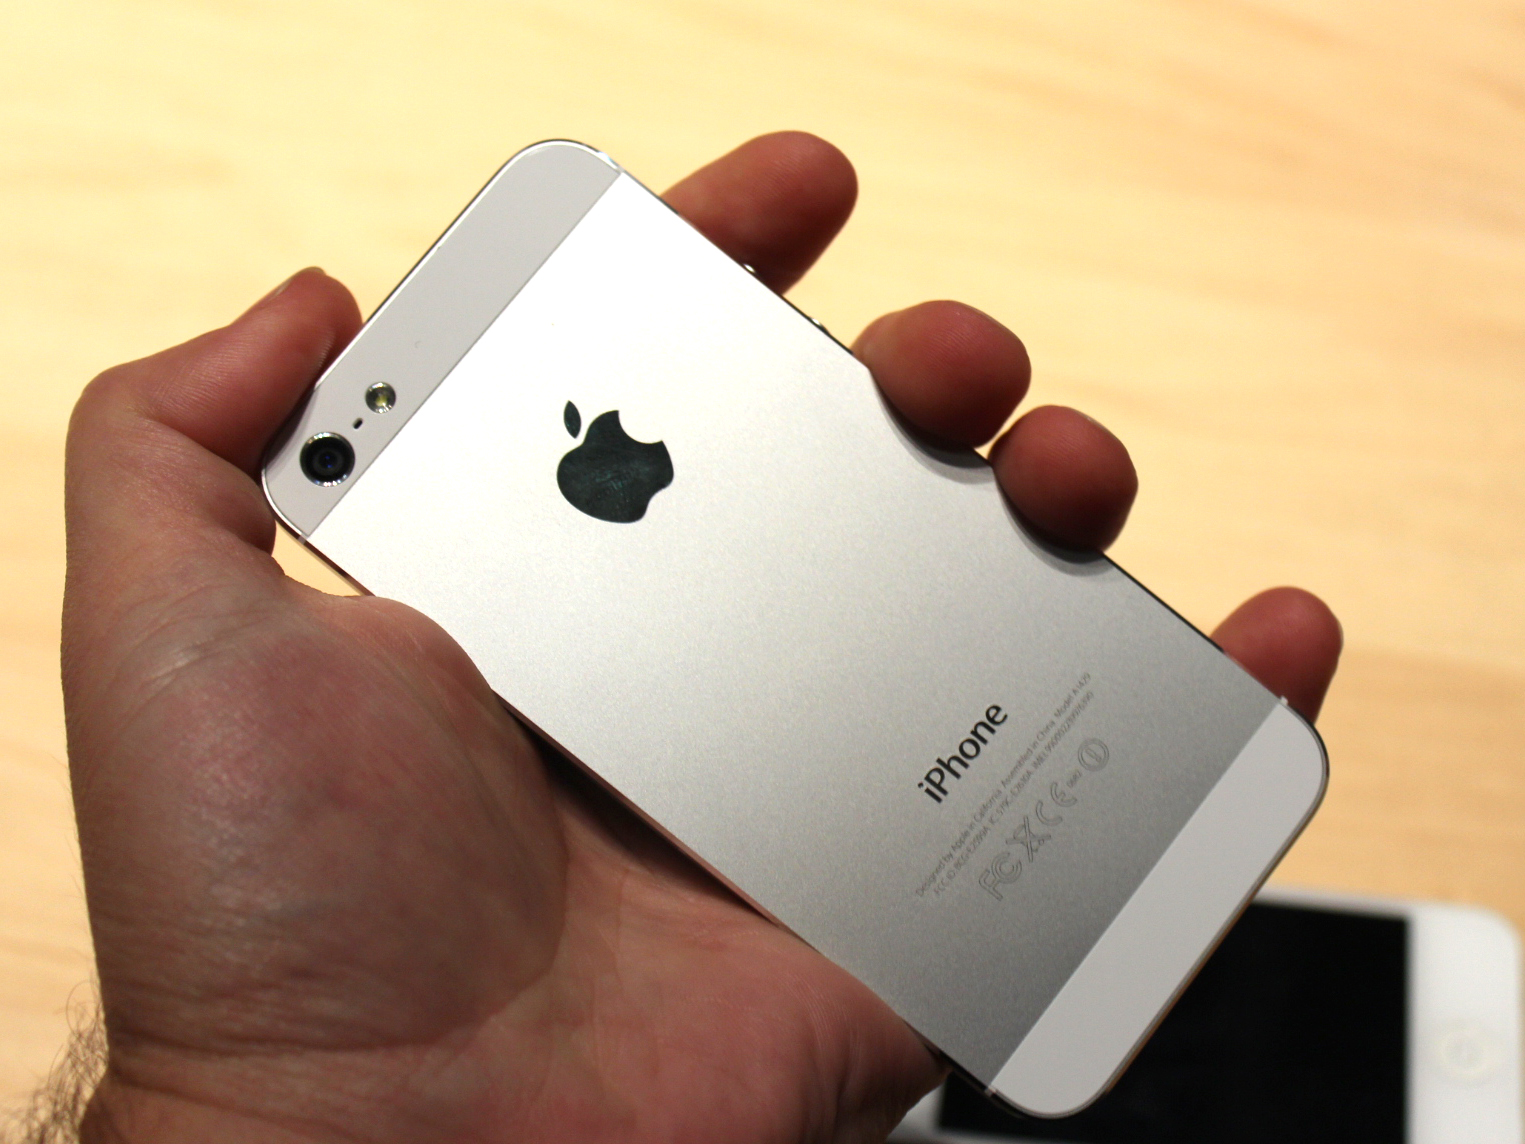 iPhone 5 hands-on: Slim is in